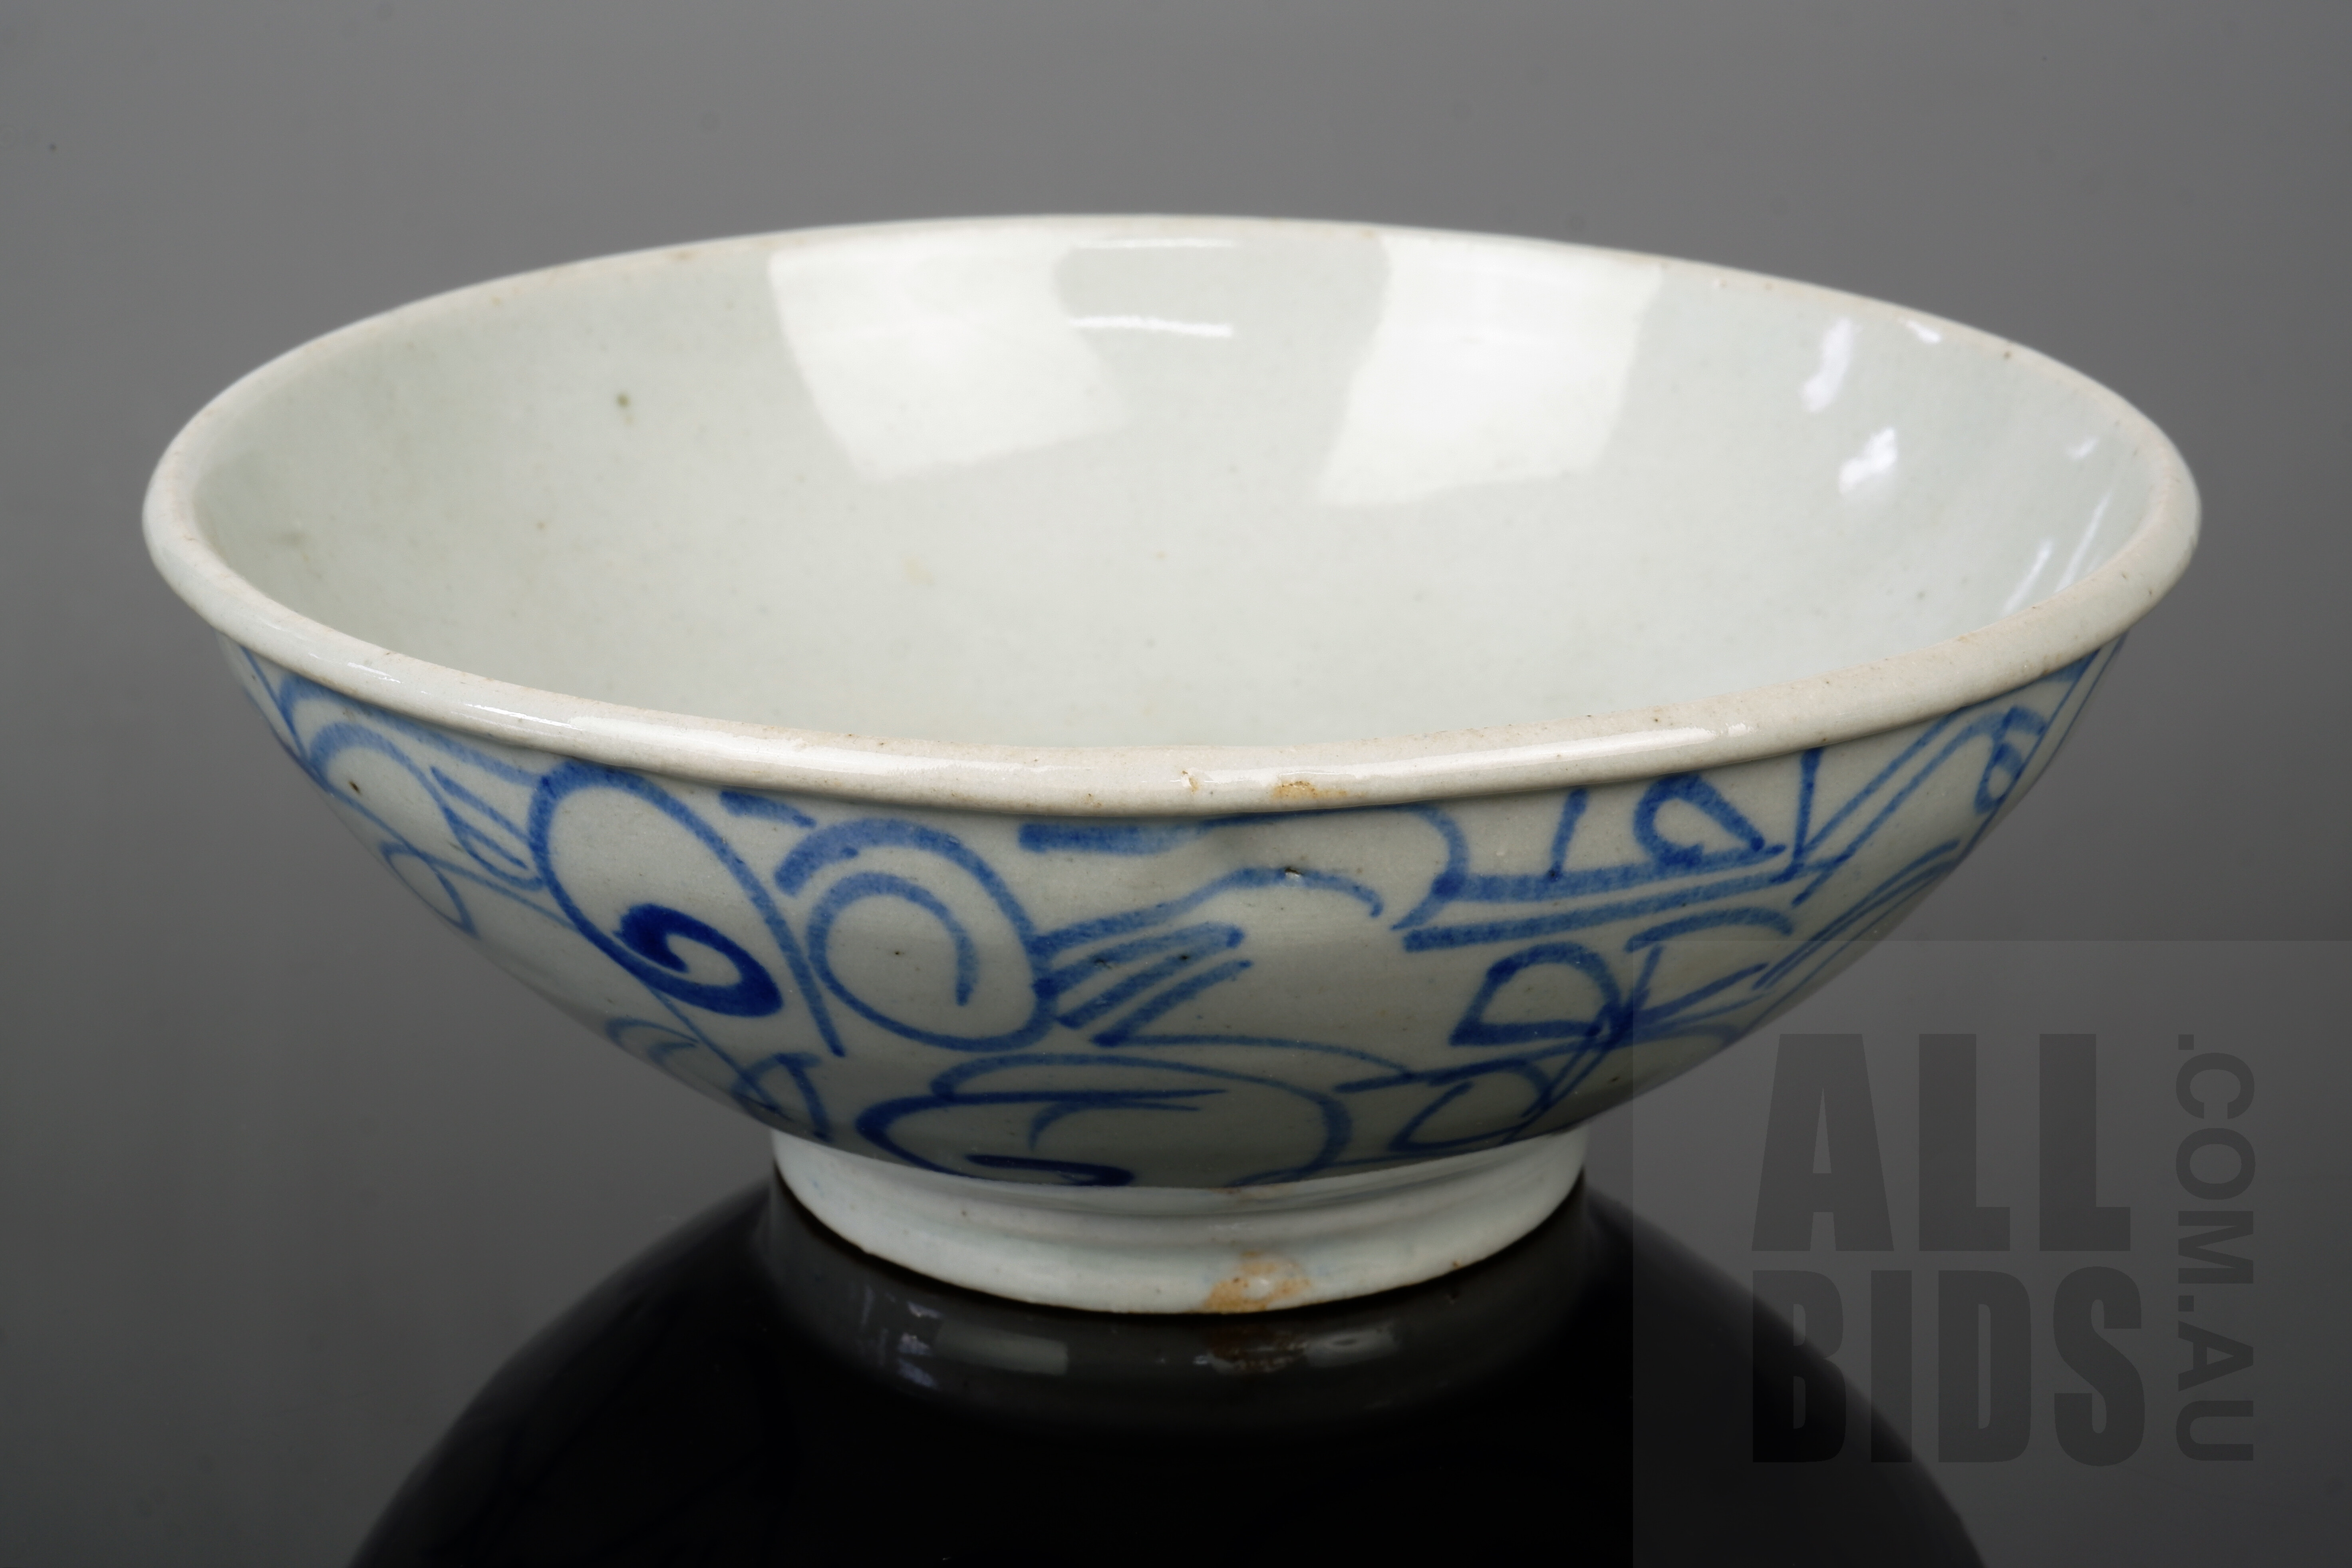 'Chinese Fujian Ware Blue and White Shallow Bowl, Early 19th Century'